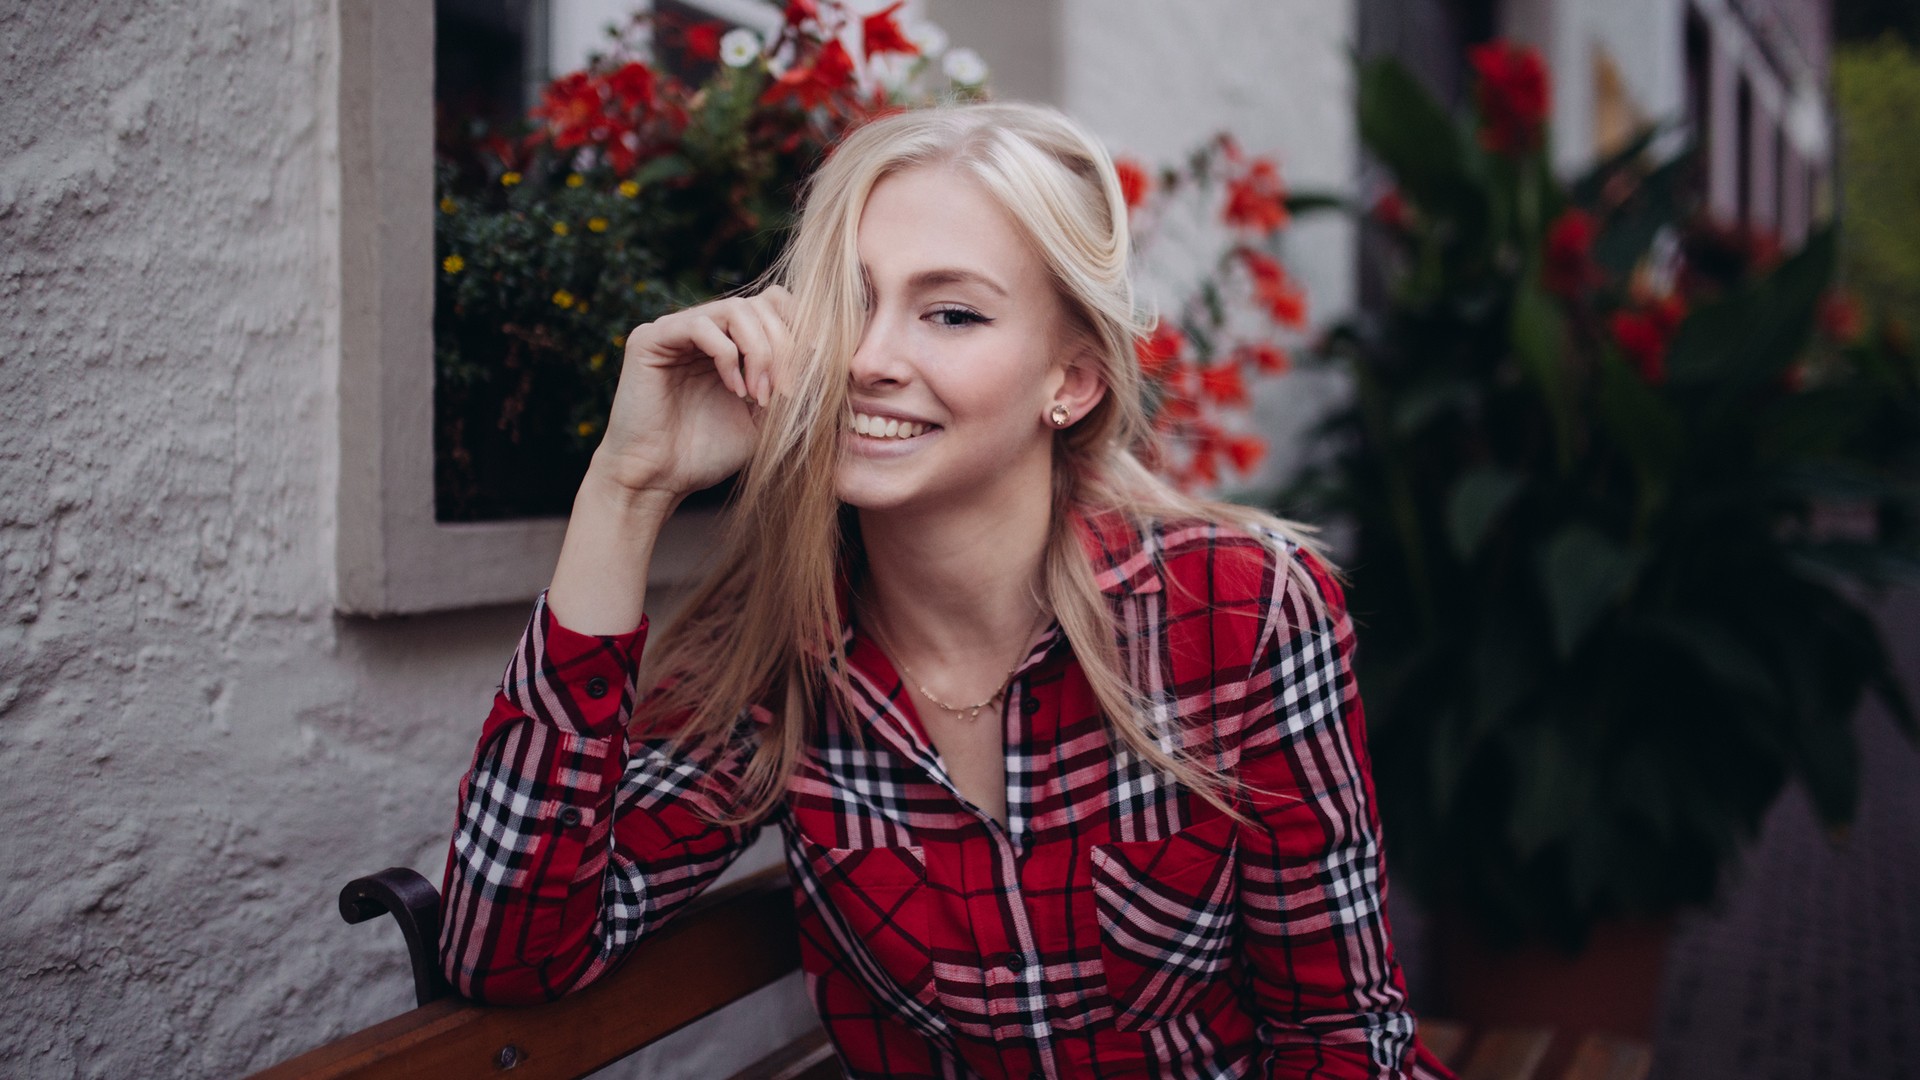 People 1920x1080 women model blonde long hair looking at viewer smiling checkered shirt women outdoors flowers house hair in face bench sitting plaid shirt red shirt hair over one eye on bench